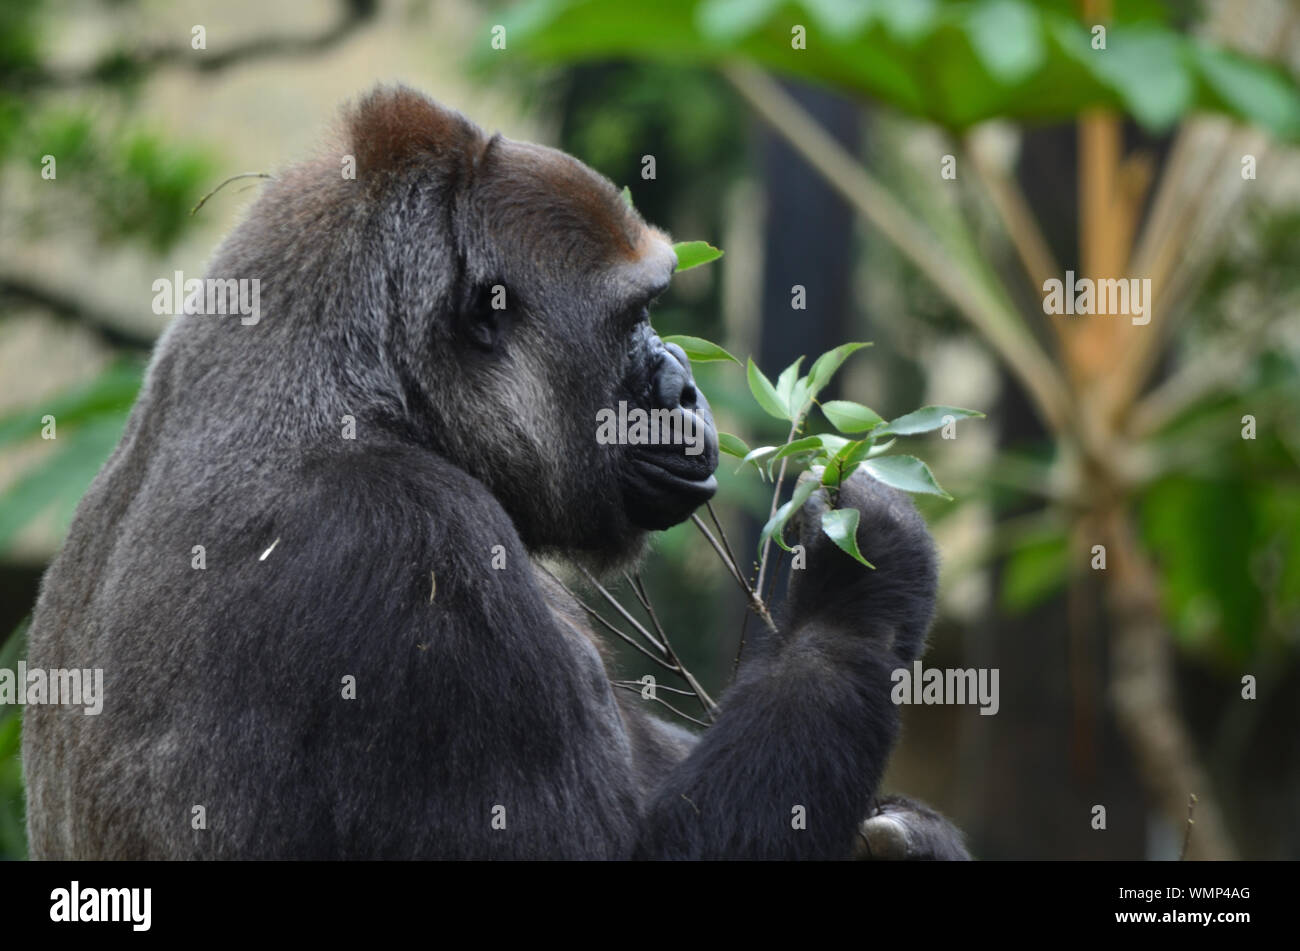 Close-up Of Chimpanzee Eating Leaves Stock Photo